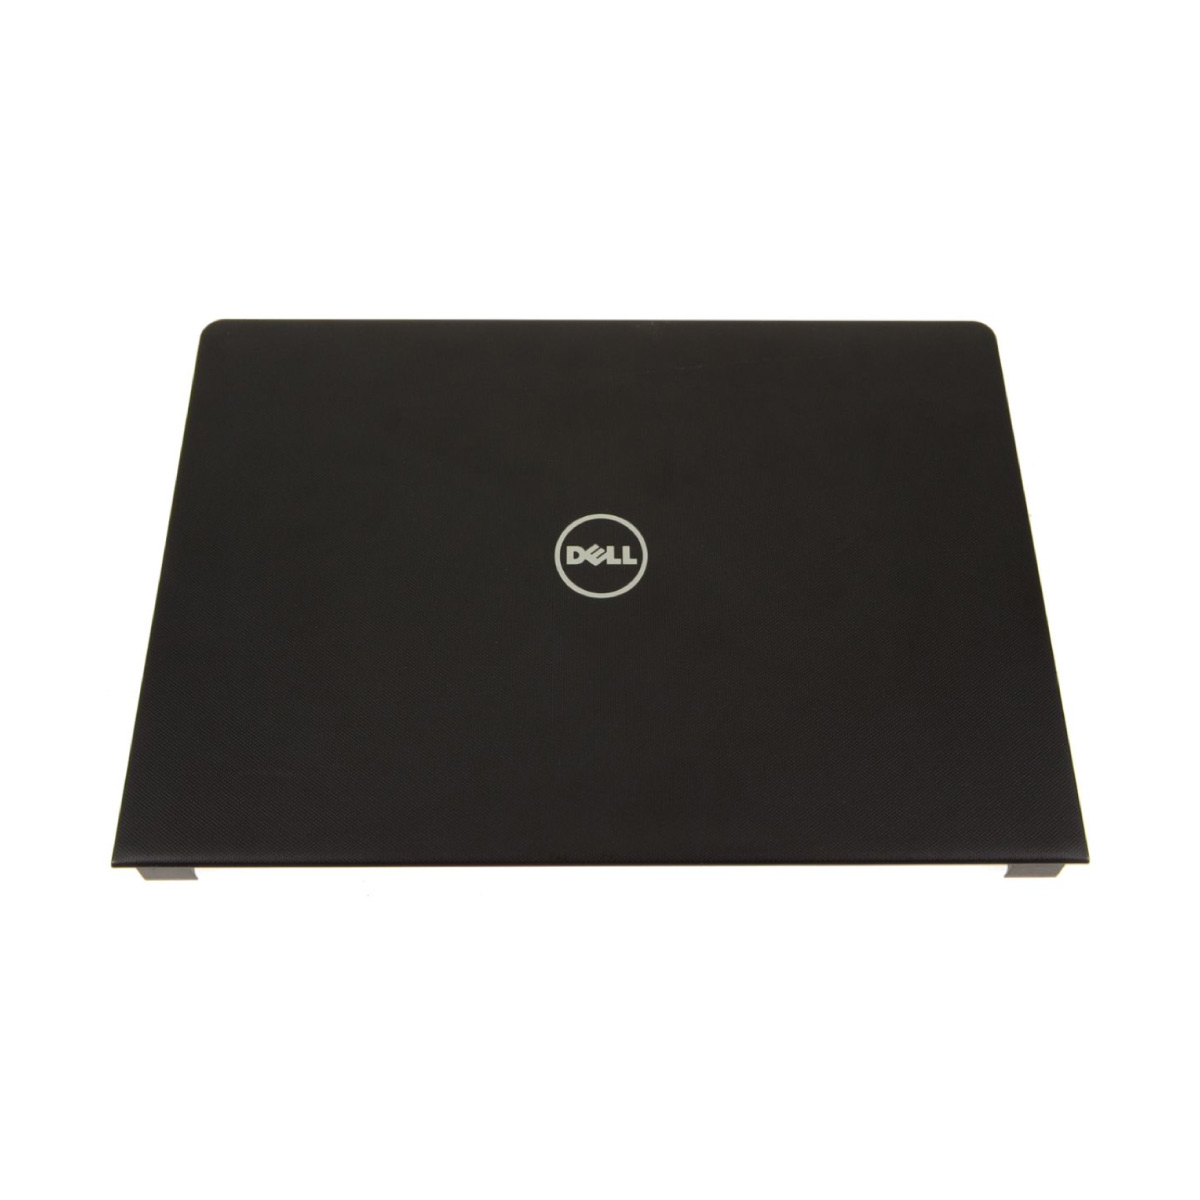 Dell Vostro 15 3568 LCD Back Cover|Laptop Spare | Worthit